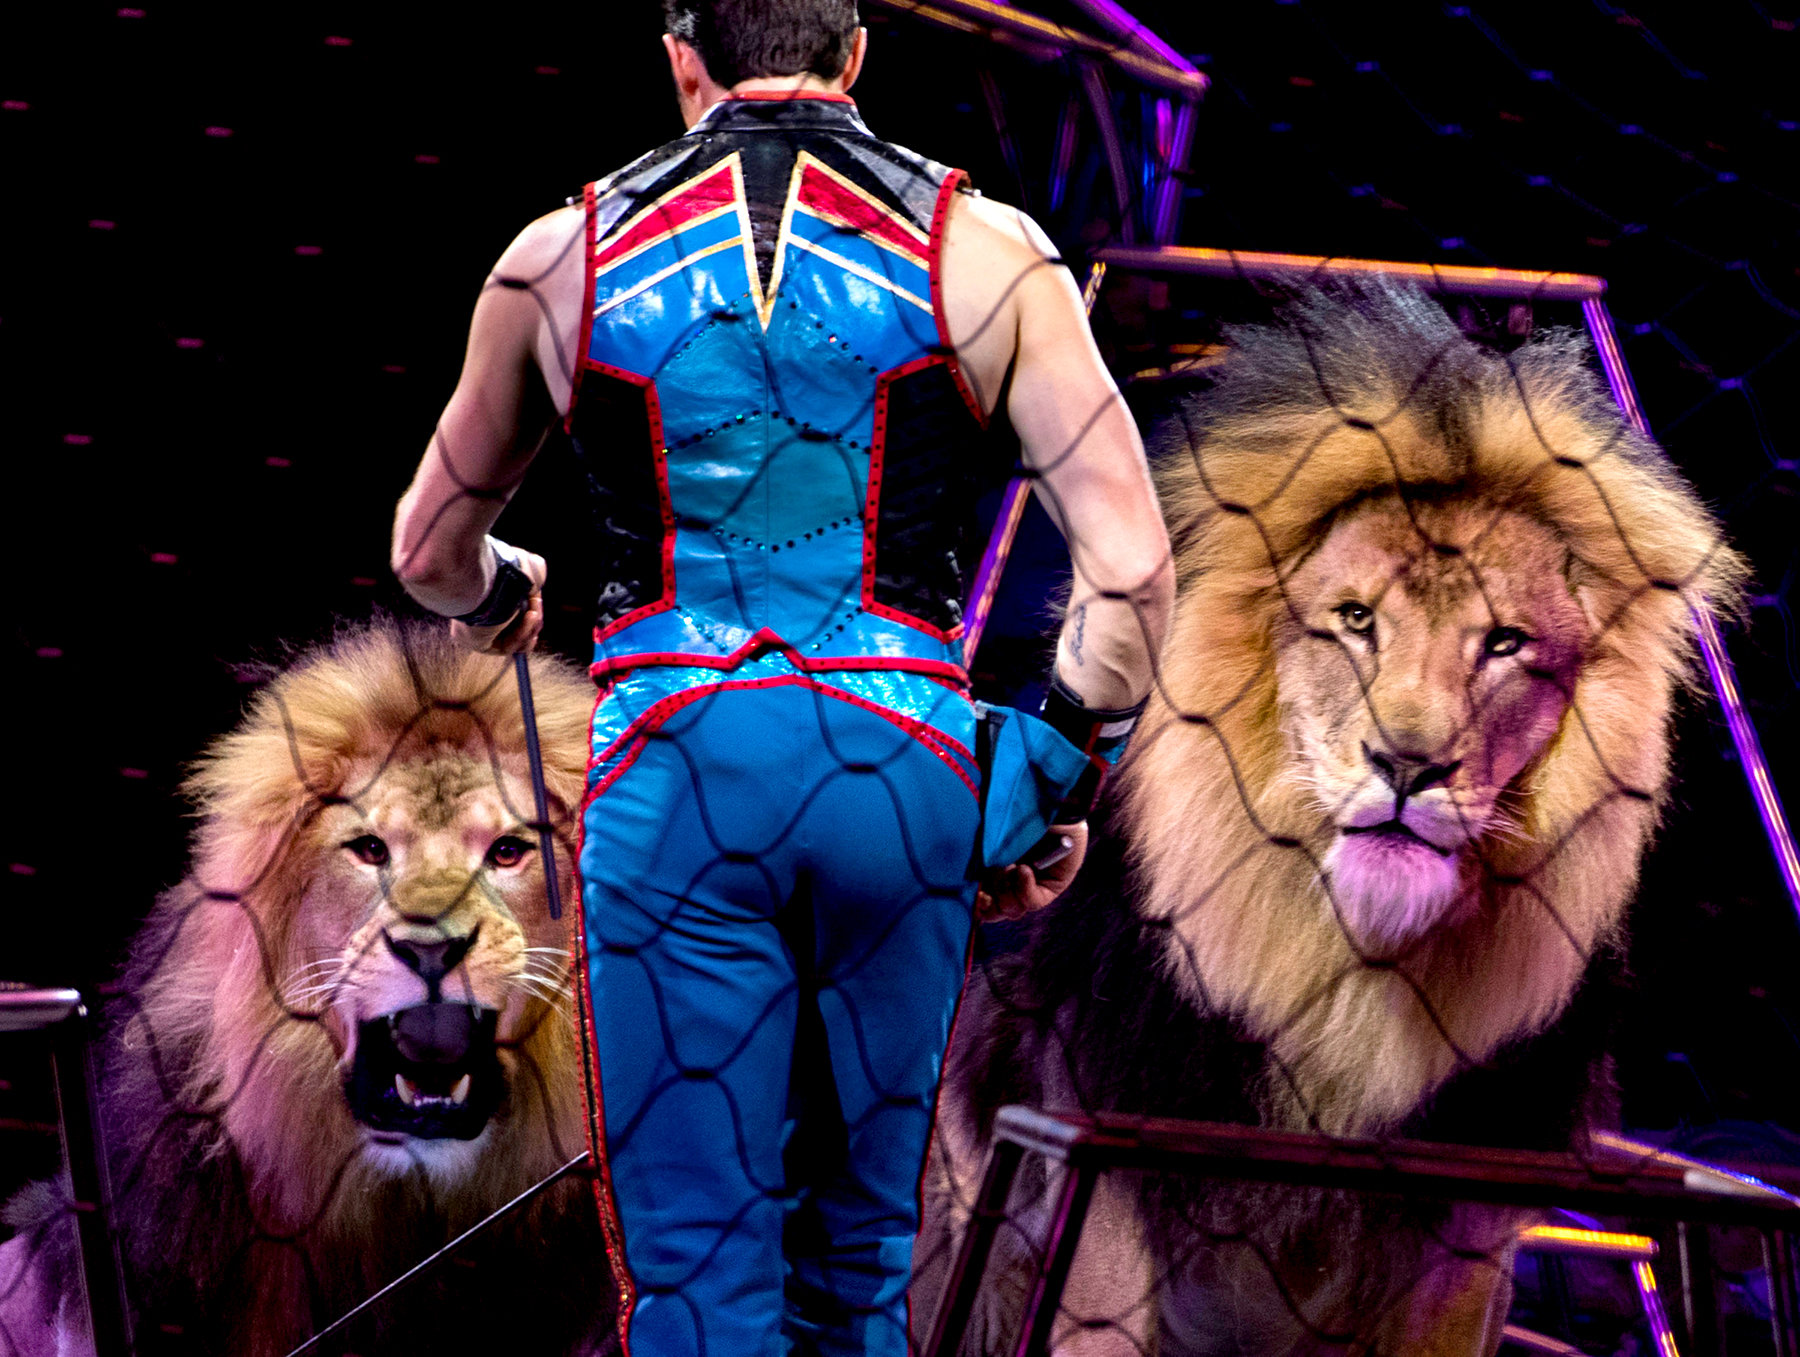 A Classic Circus Folds Its Tent - Video - NYTimes.com